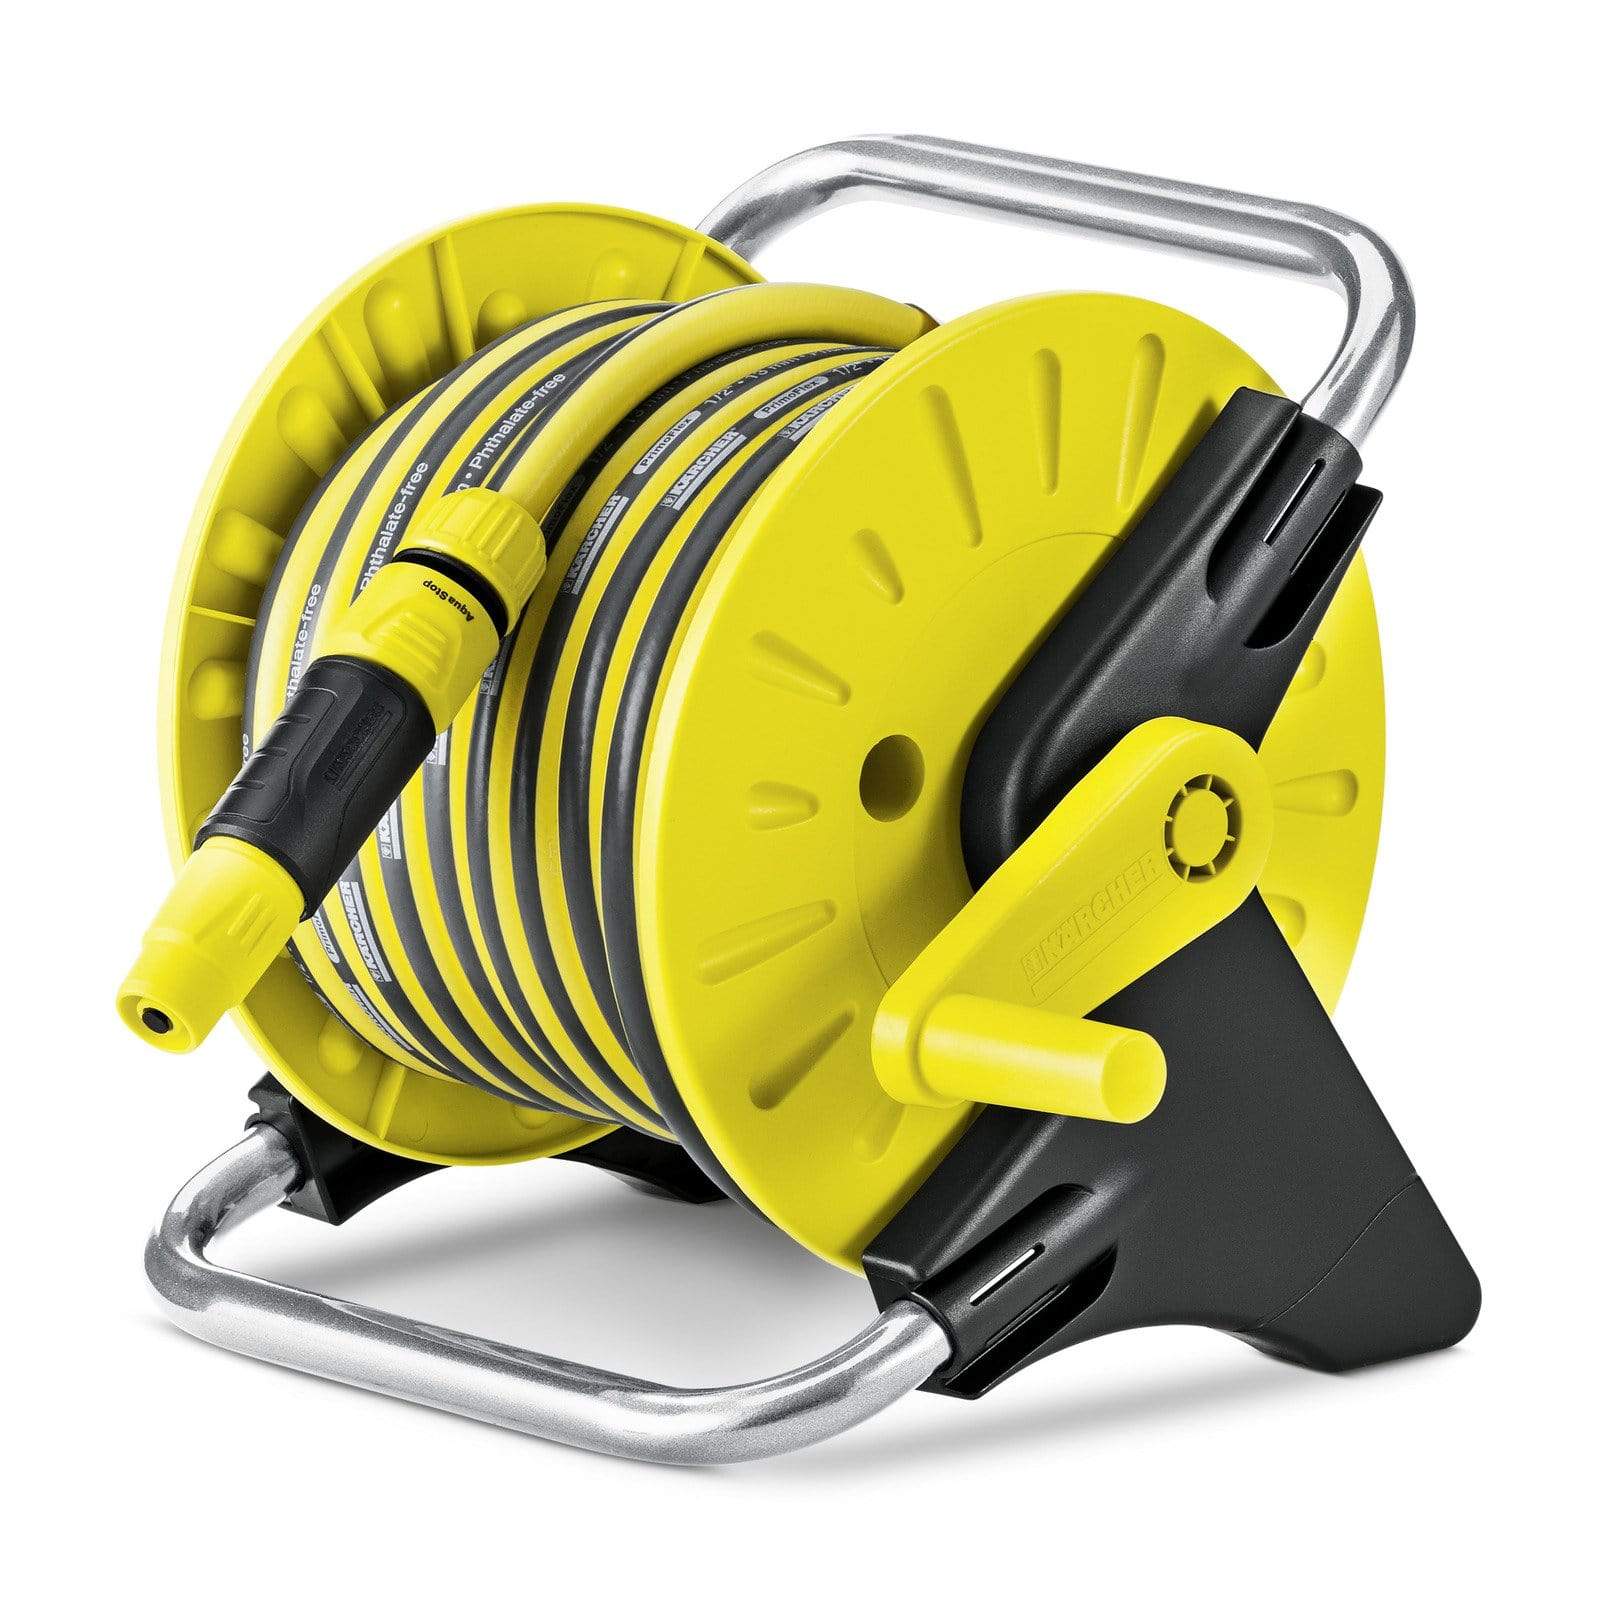 Karcher Hose Reel with 15m Hose HR 25 | Supply Master | Accra, Ghana Tools Building Steel Engineering Hardware tool